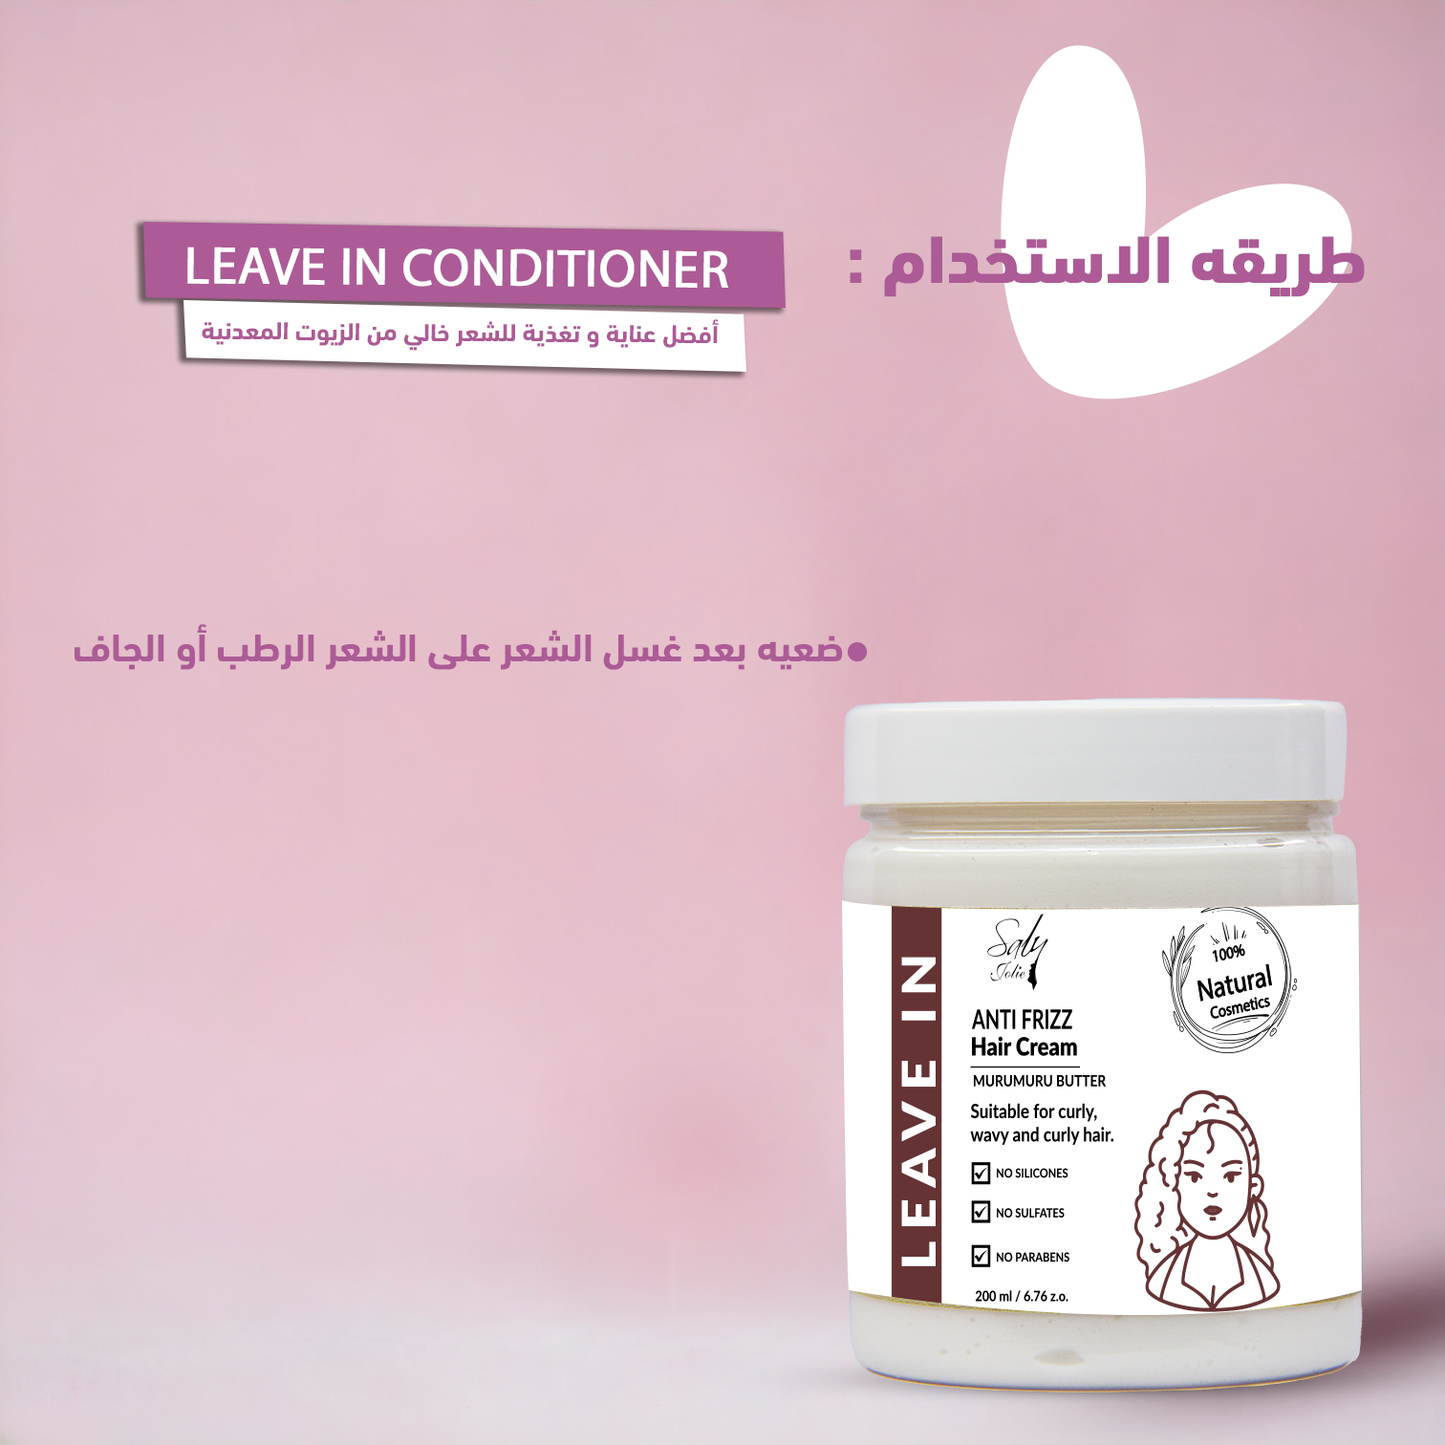 Leave in hair Conditioner with Shea butter anti frizz